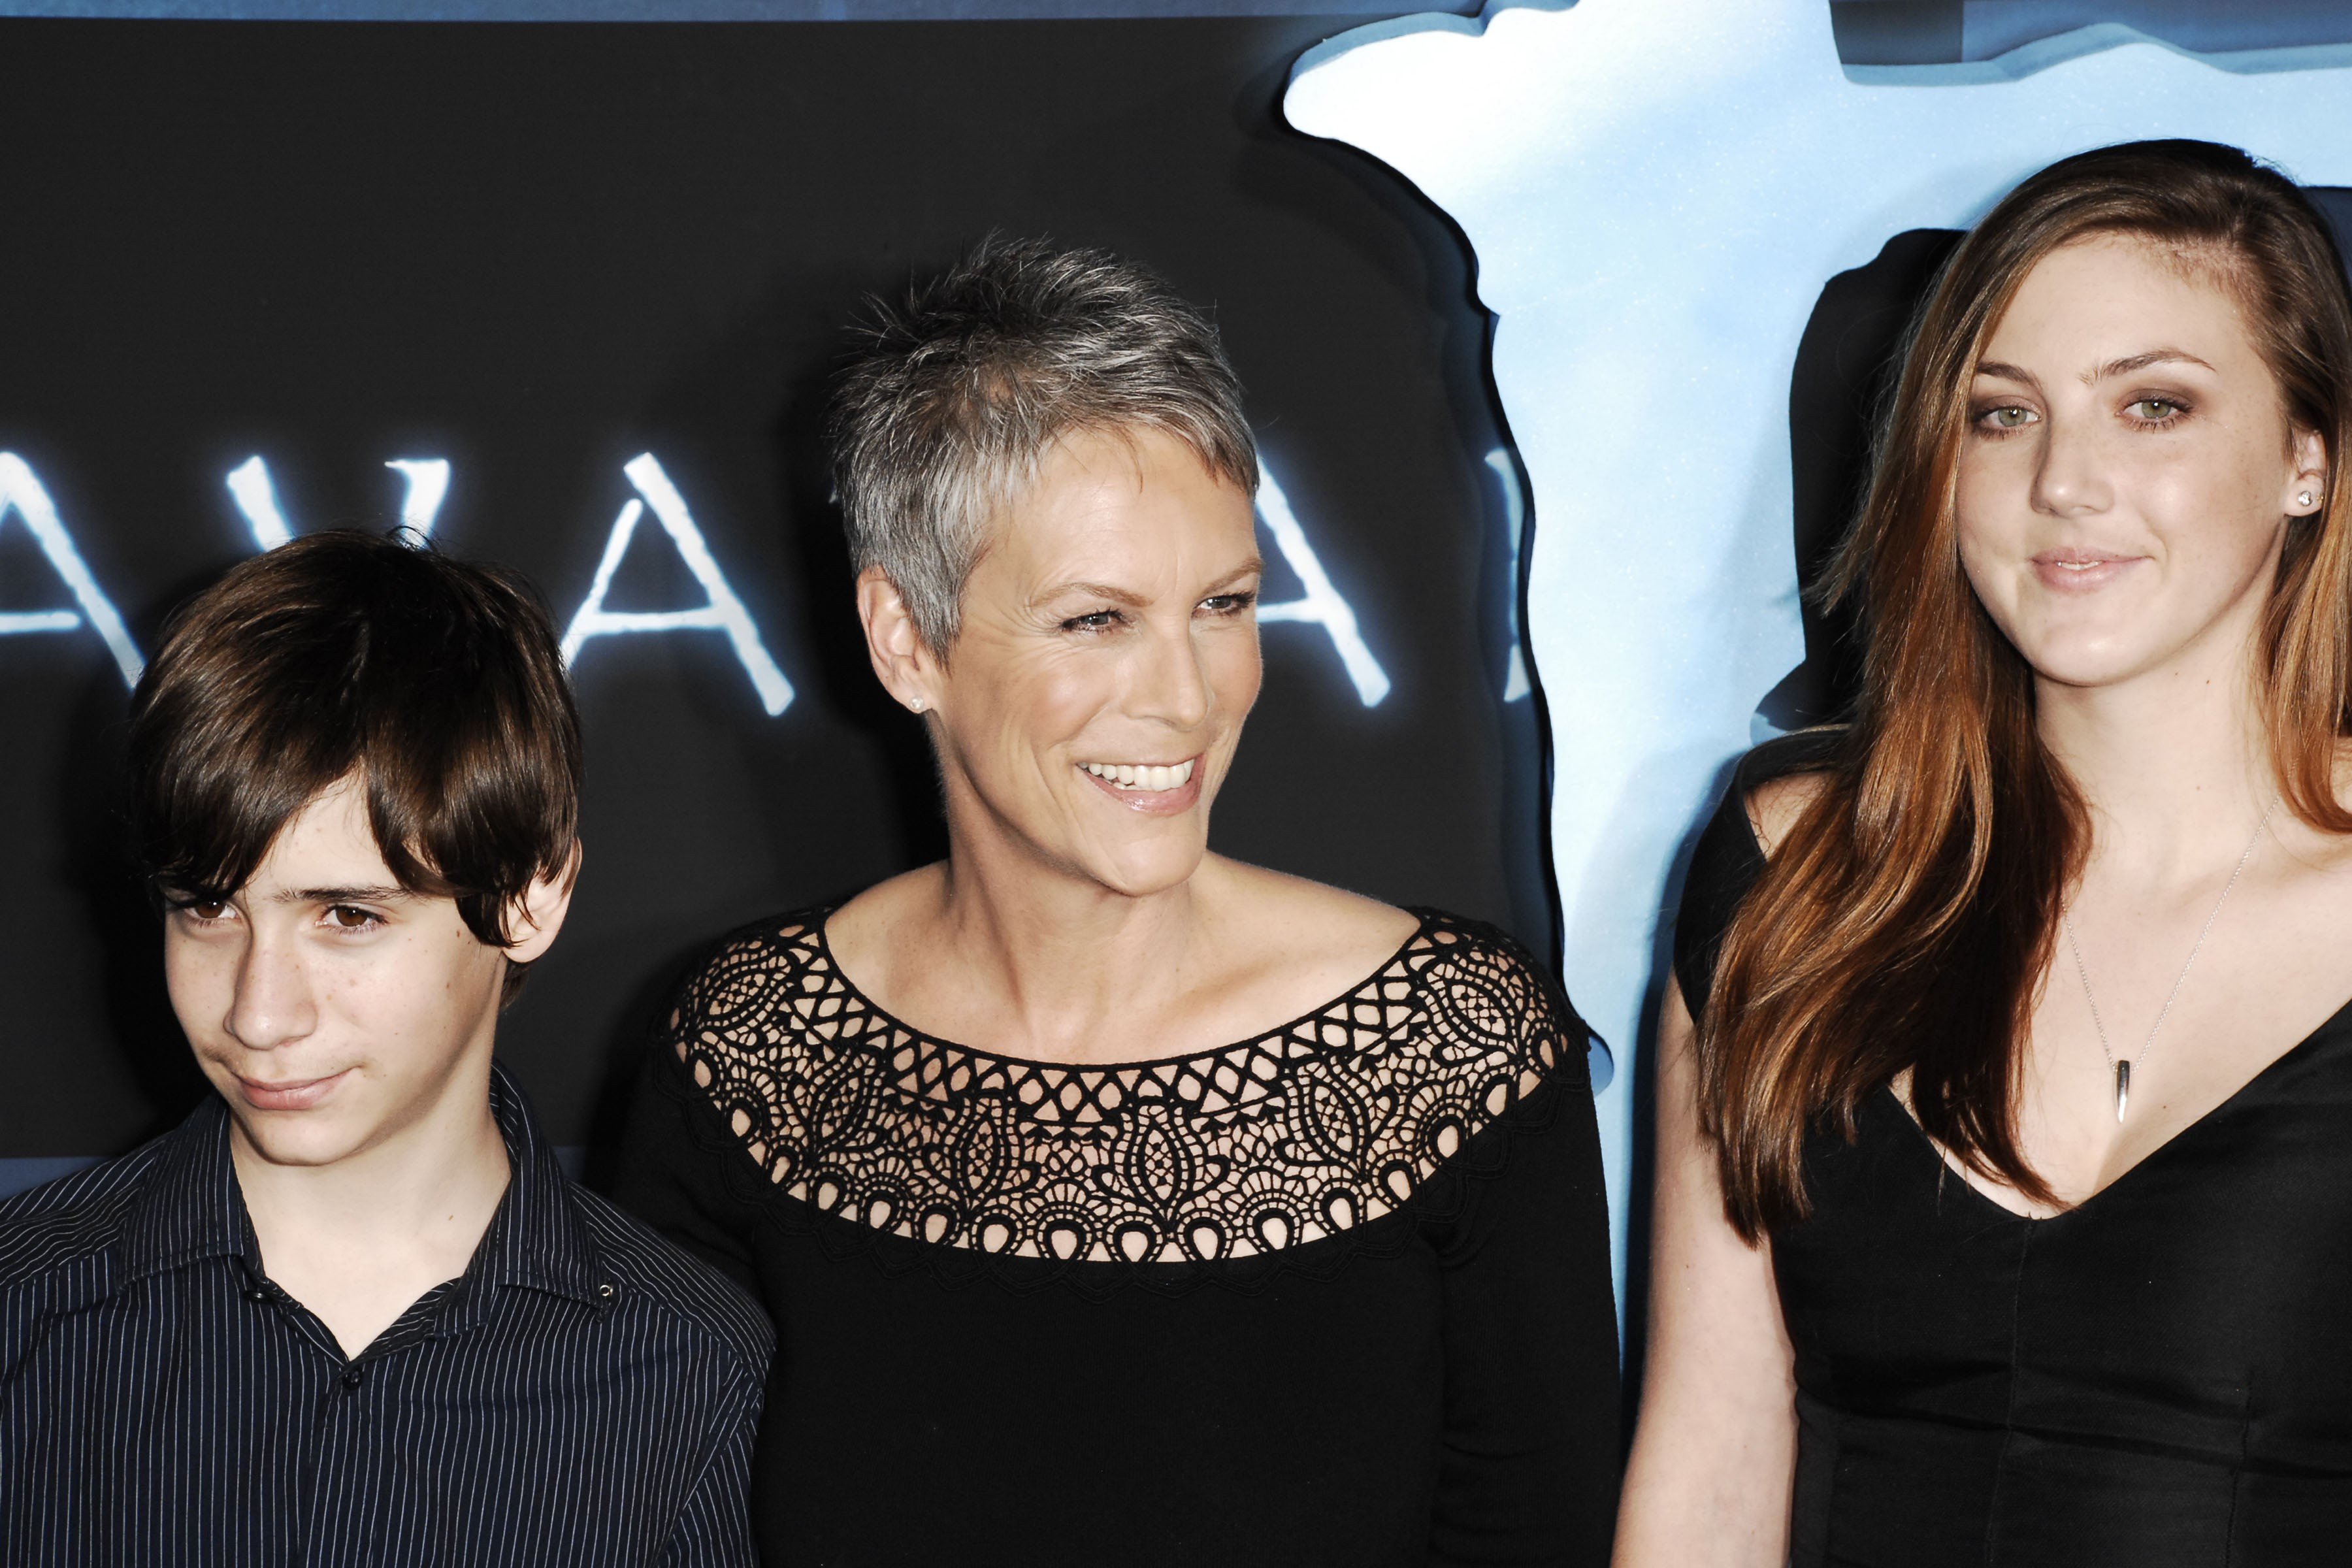 Thomas Guest, Jamie Lee Curtis and Annie Guest attend The Los Angeles Premiere of AVATAR at Grauman's Chinese Theatre on December 16, 2009 in Hollywood, California | Source: Getty Images